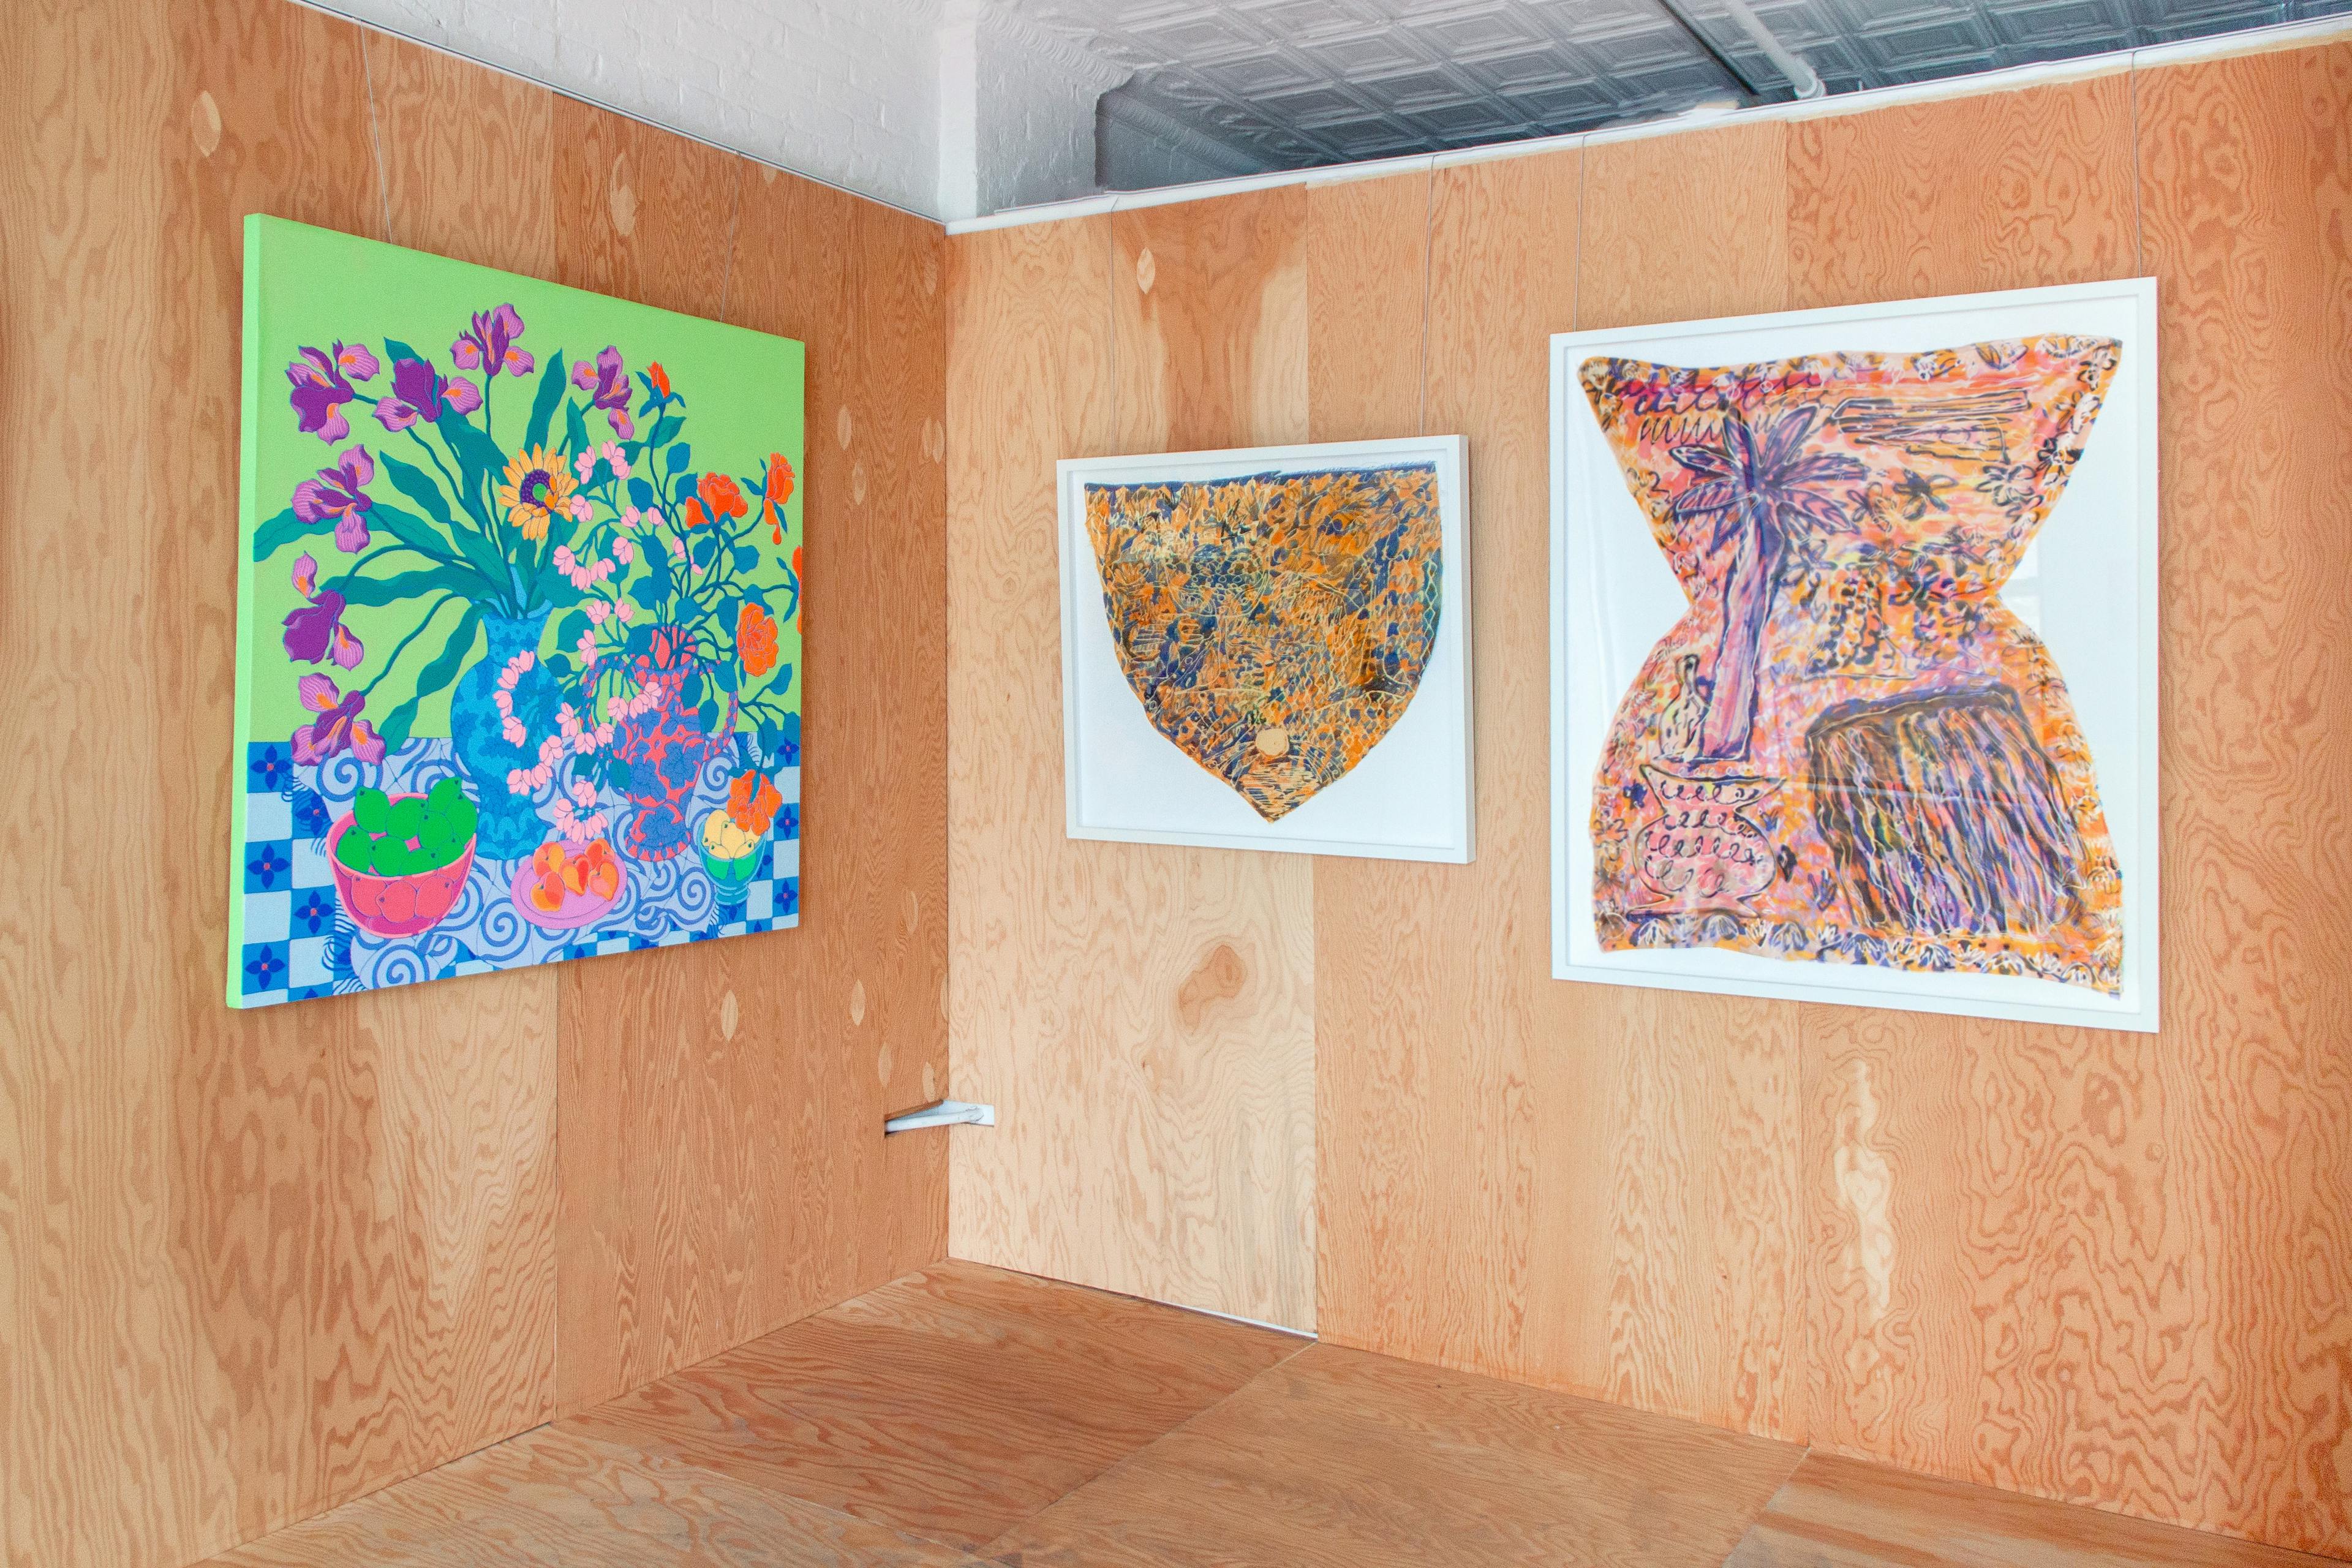 Artwork by Sarah Ingraham and Padma Rajendran in the exhibition Over Order.